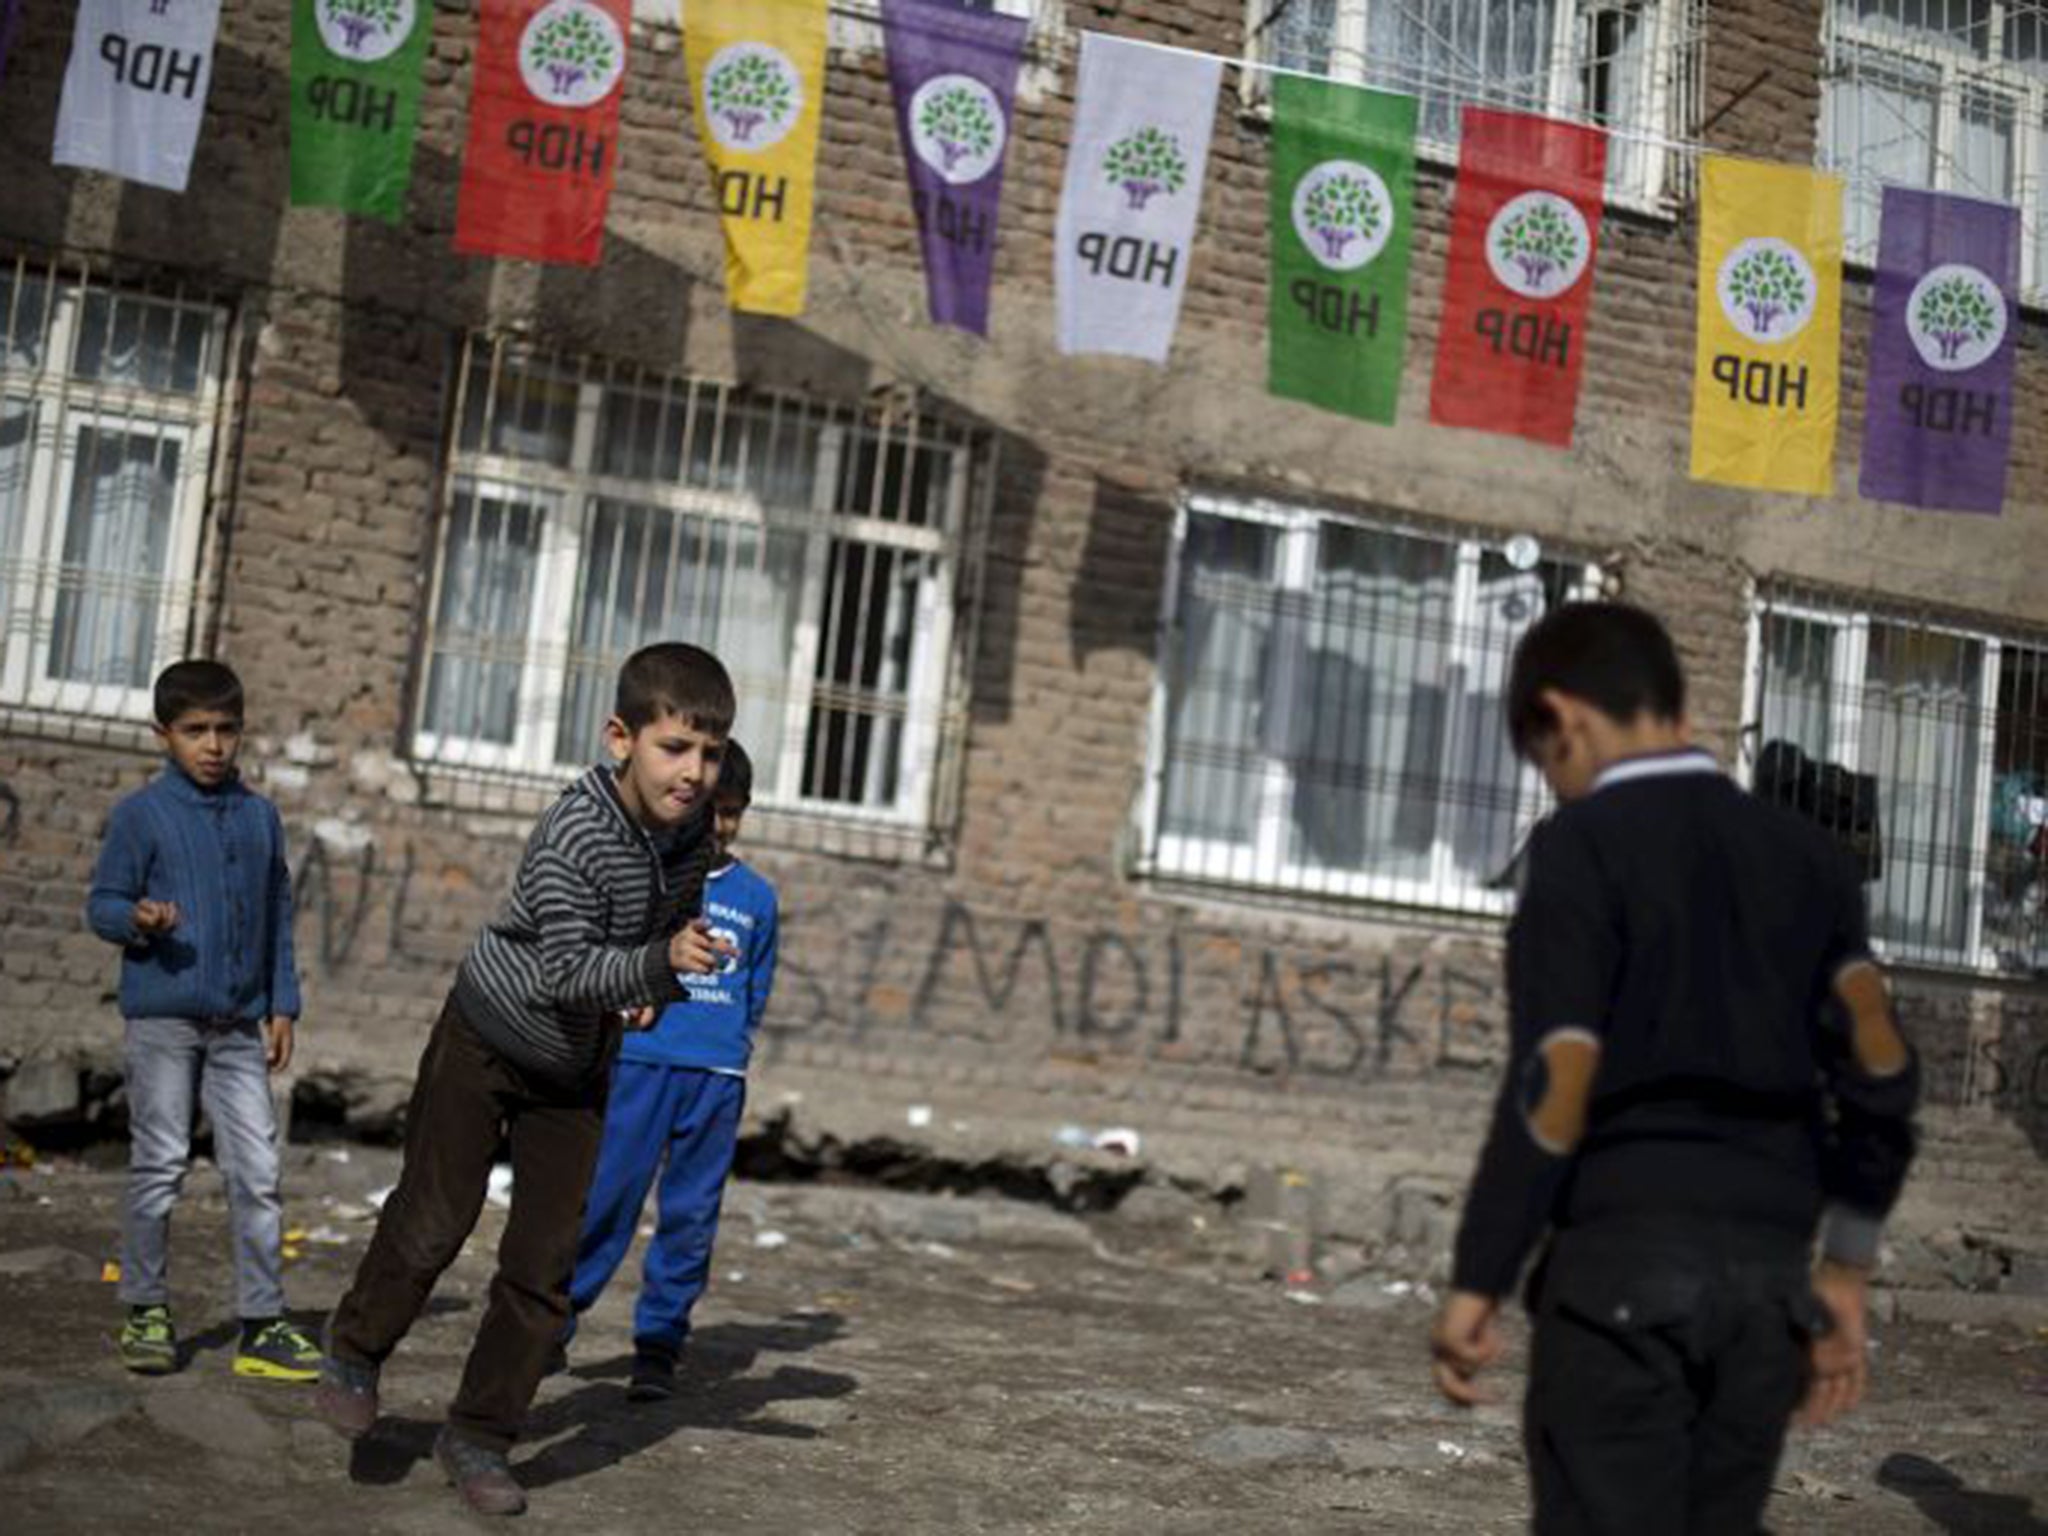 Children in Diyarbakir, in the south-east of Turkey, play under banners for the pro-Kurdish HDP